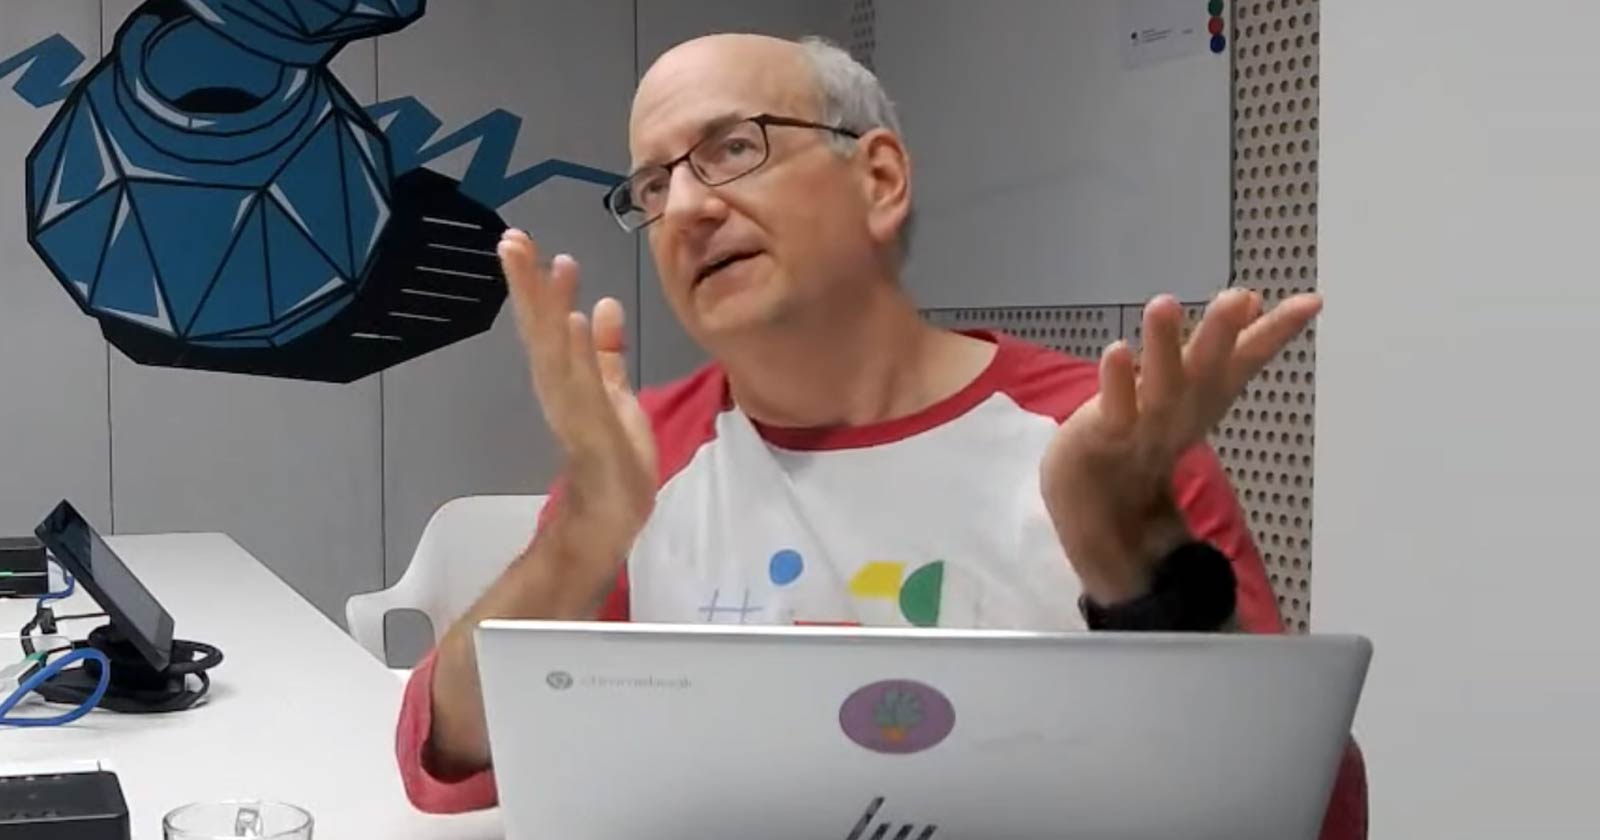 Will Linking To HTTP Pages Impact SEO? via @sejournal, @martinibuster